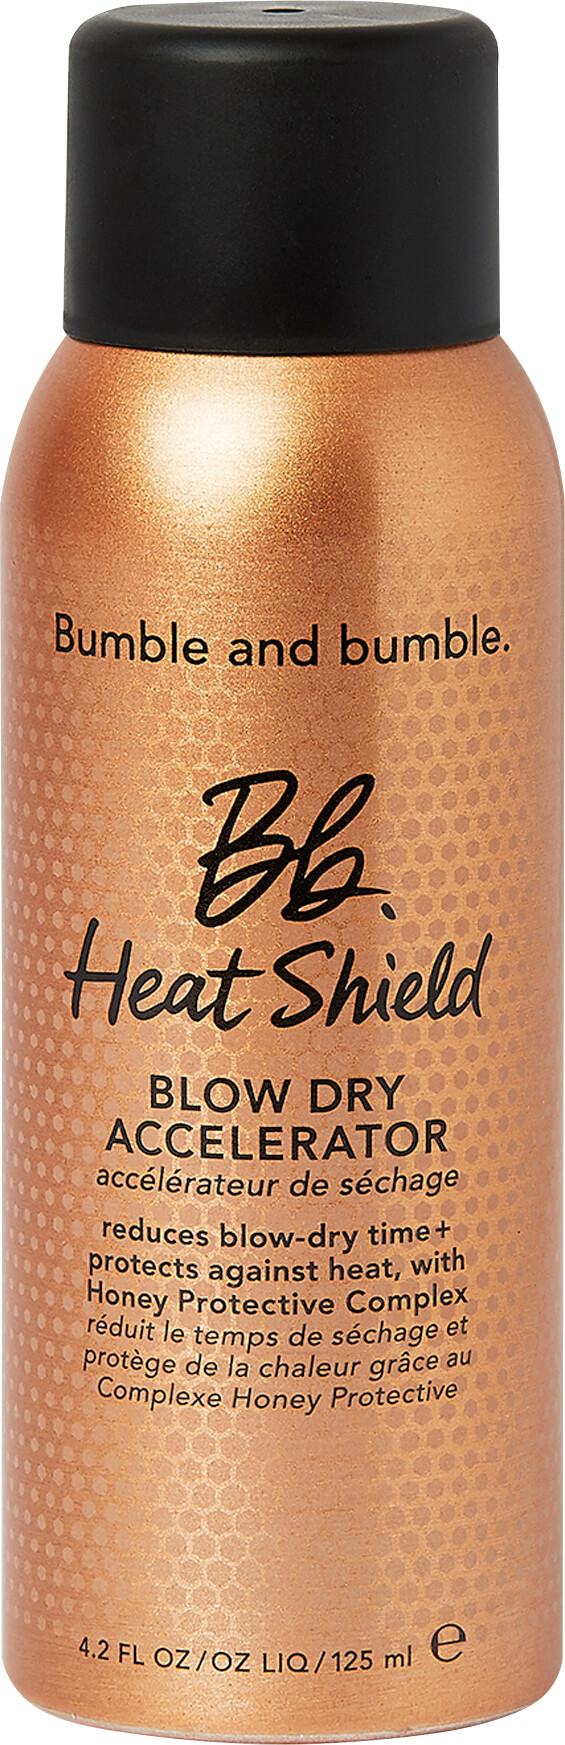 Bumble and bumble Heat Shield Blow Dry Accelerator 125ml